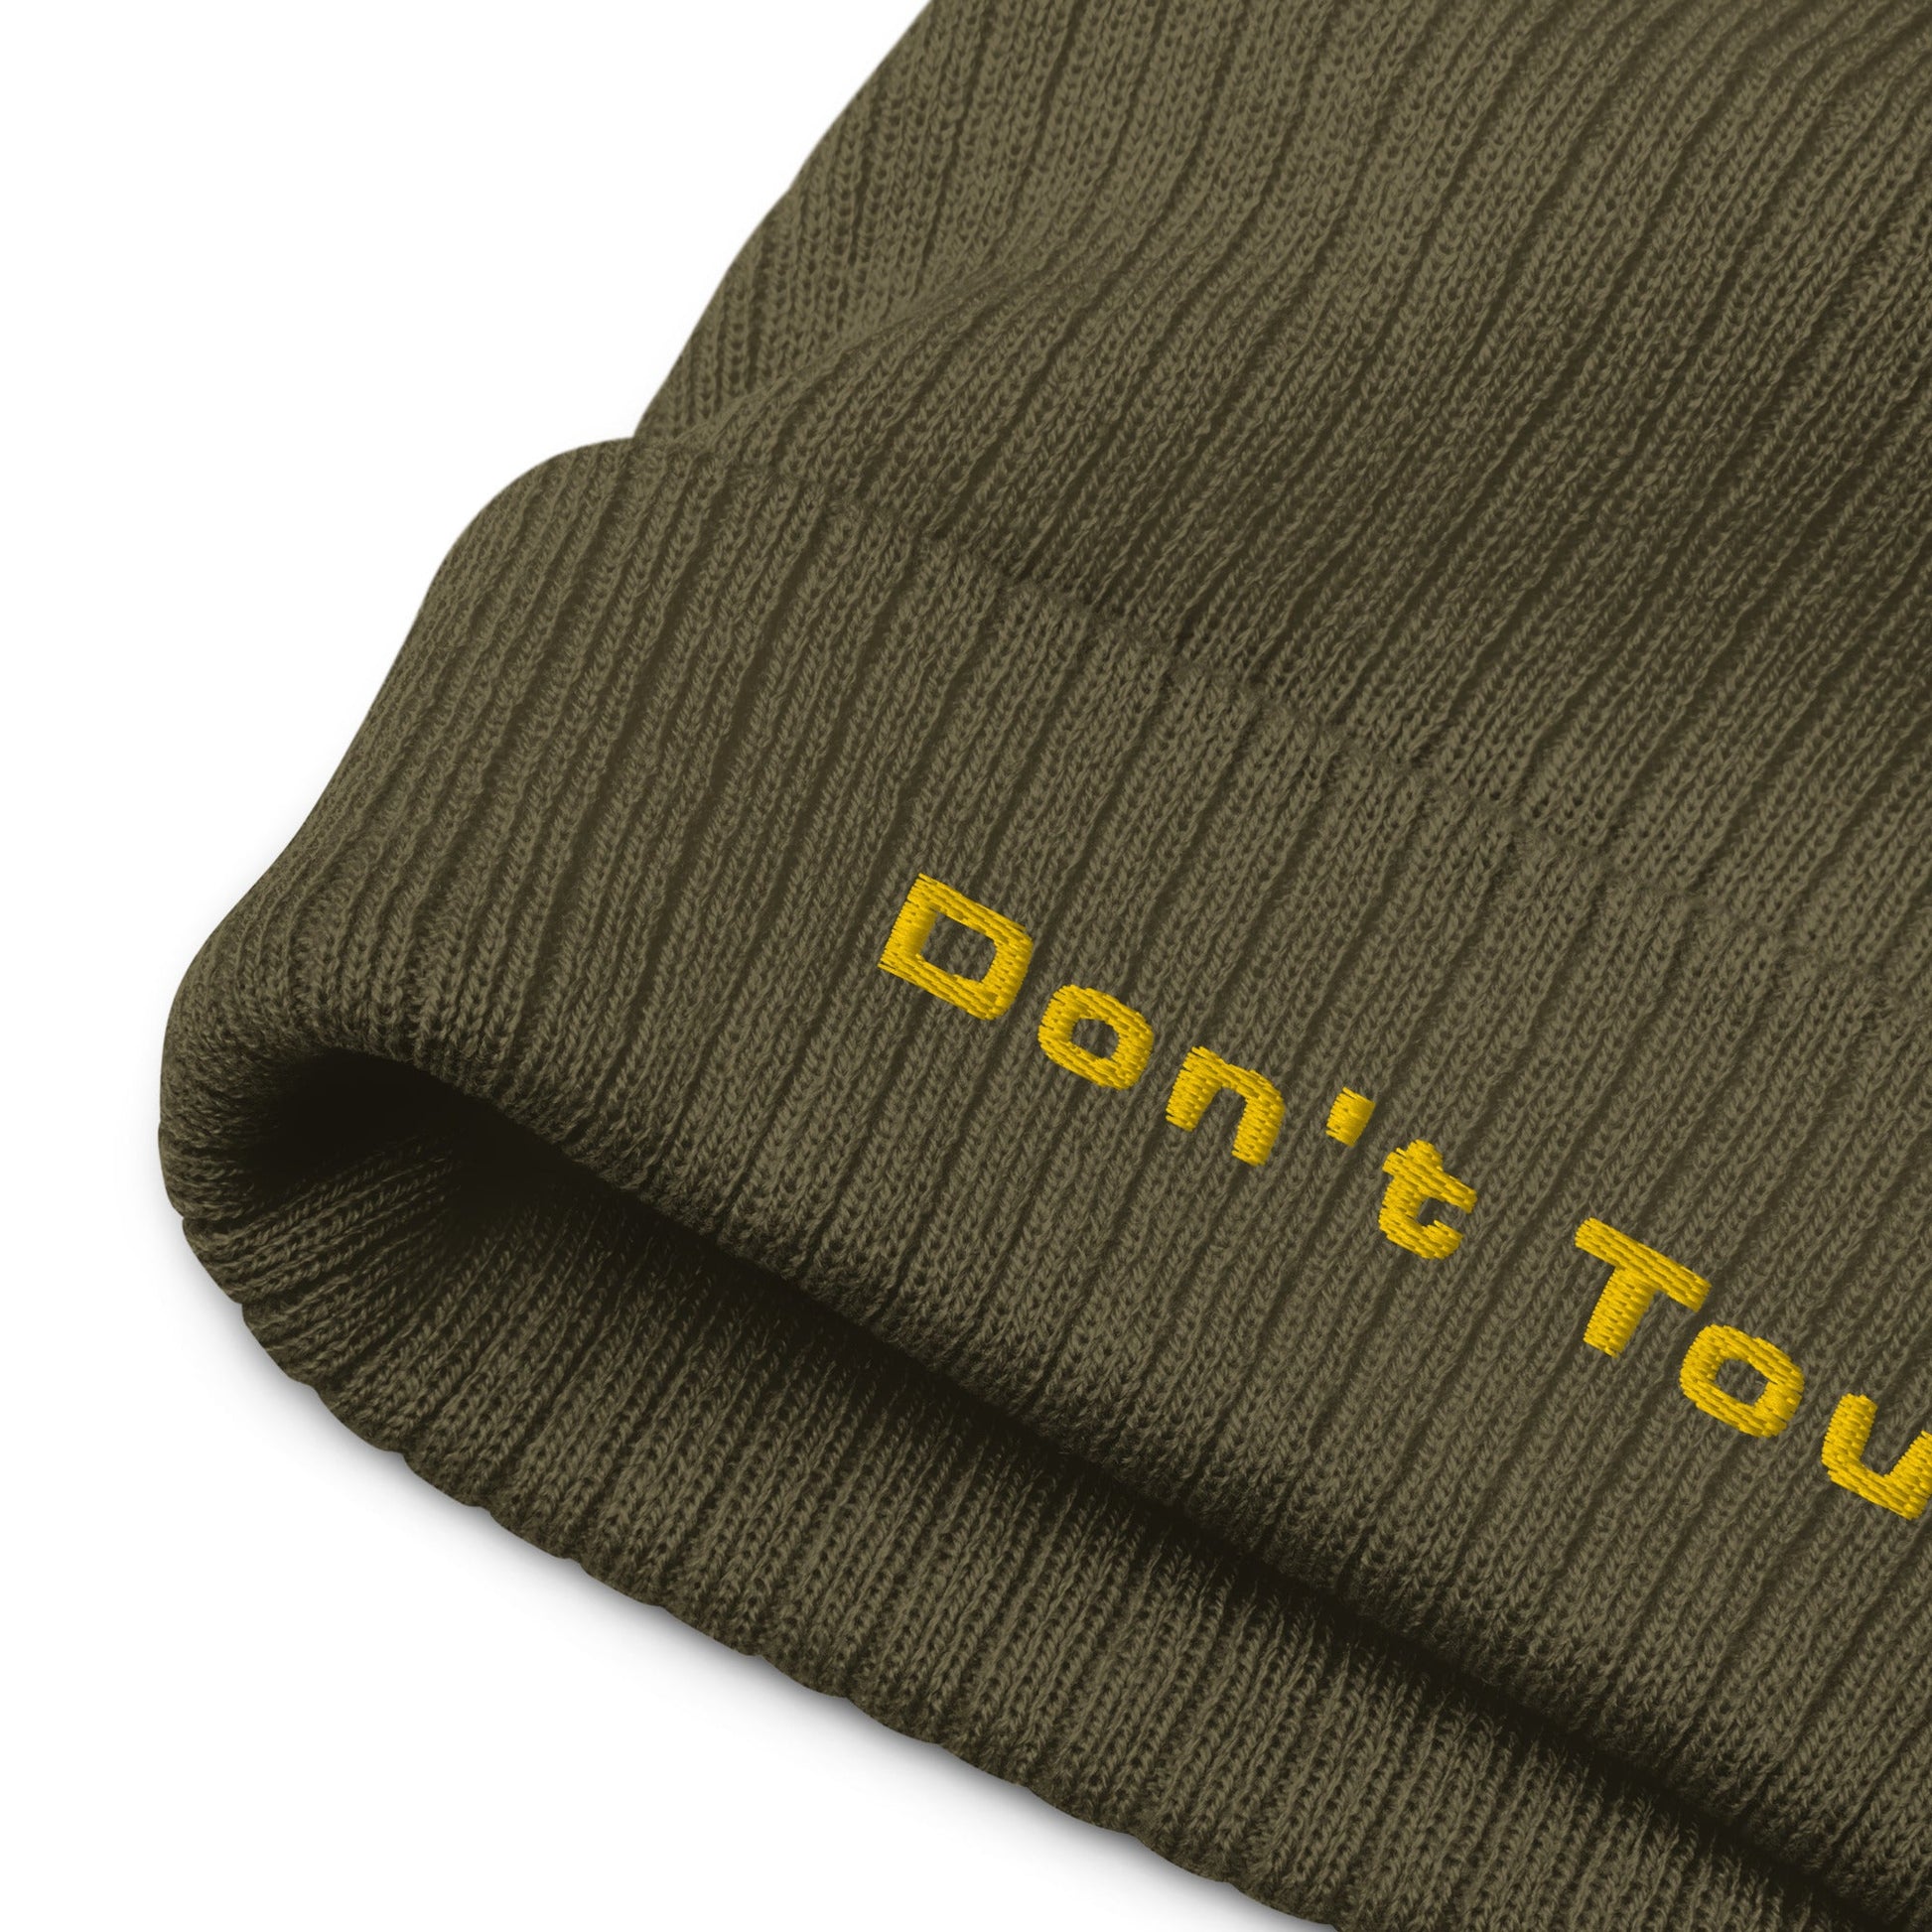 Don't Touch Cuffed Beanie - dom+bomb